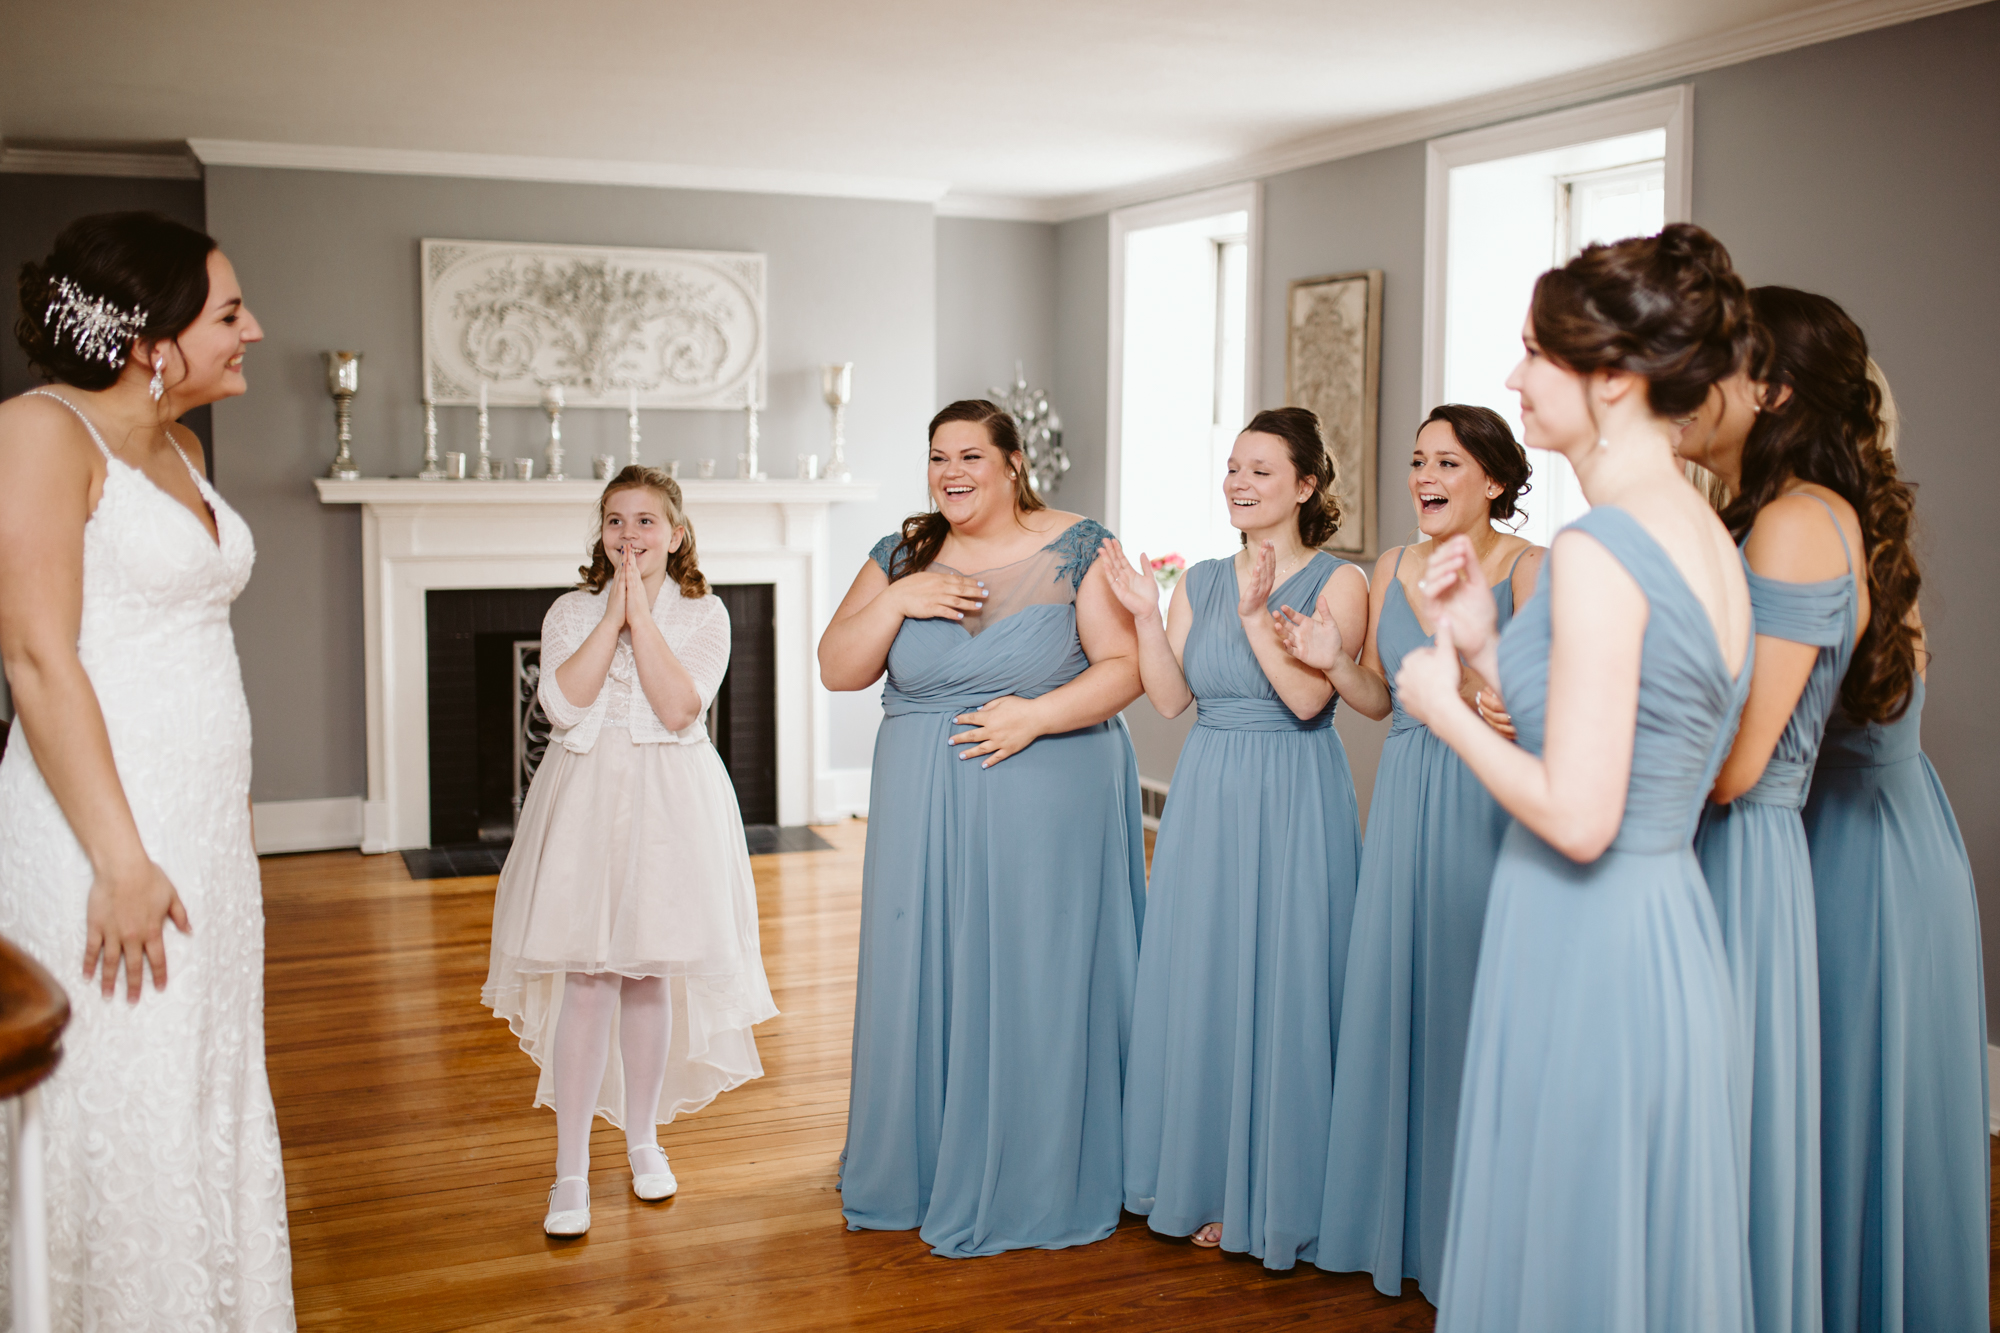 Bridesmaids reveal at stone house of st charles wedding